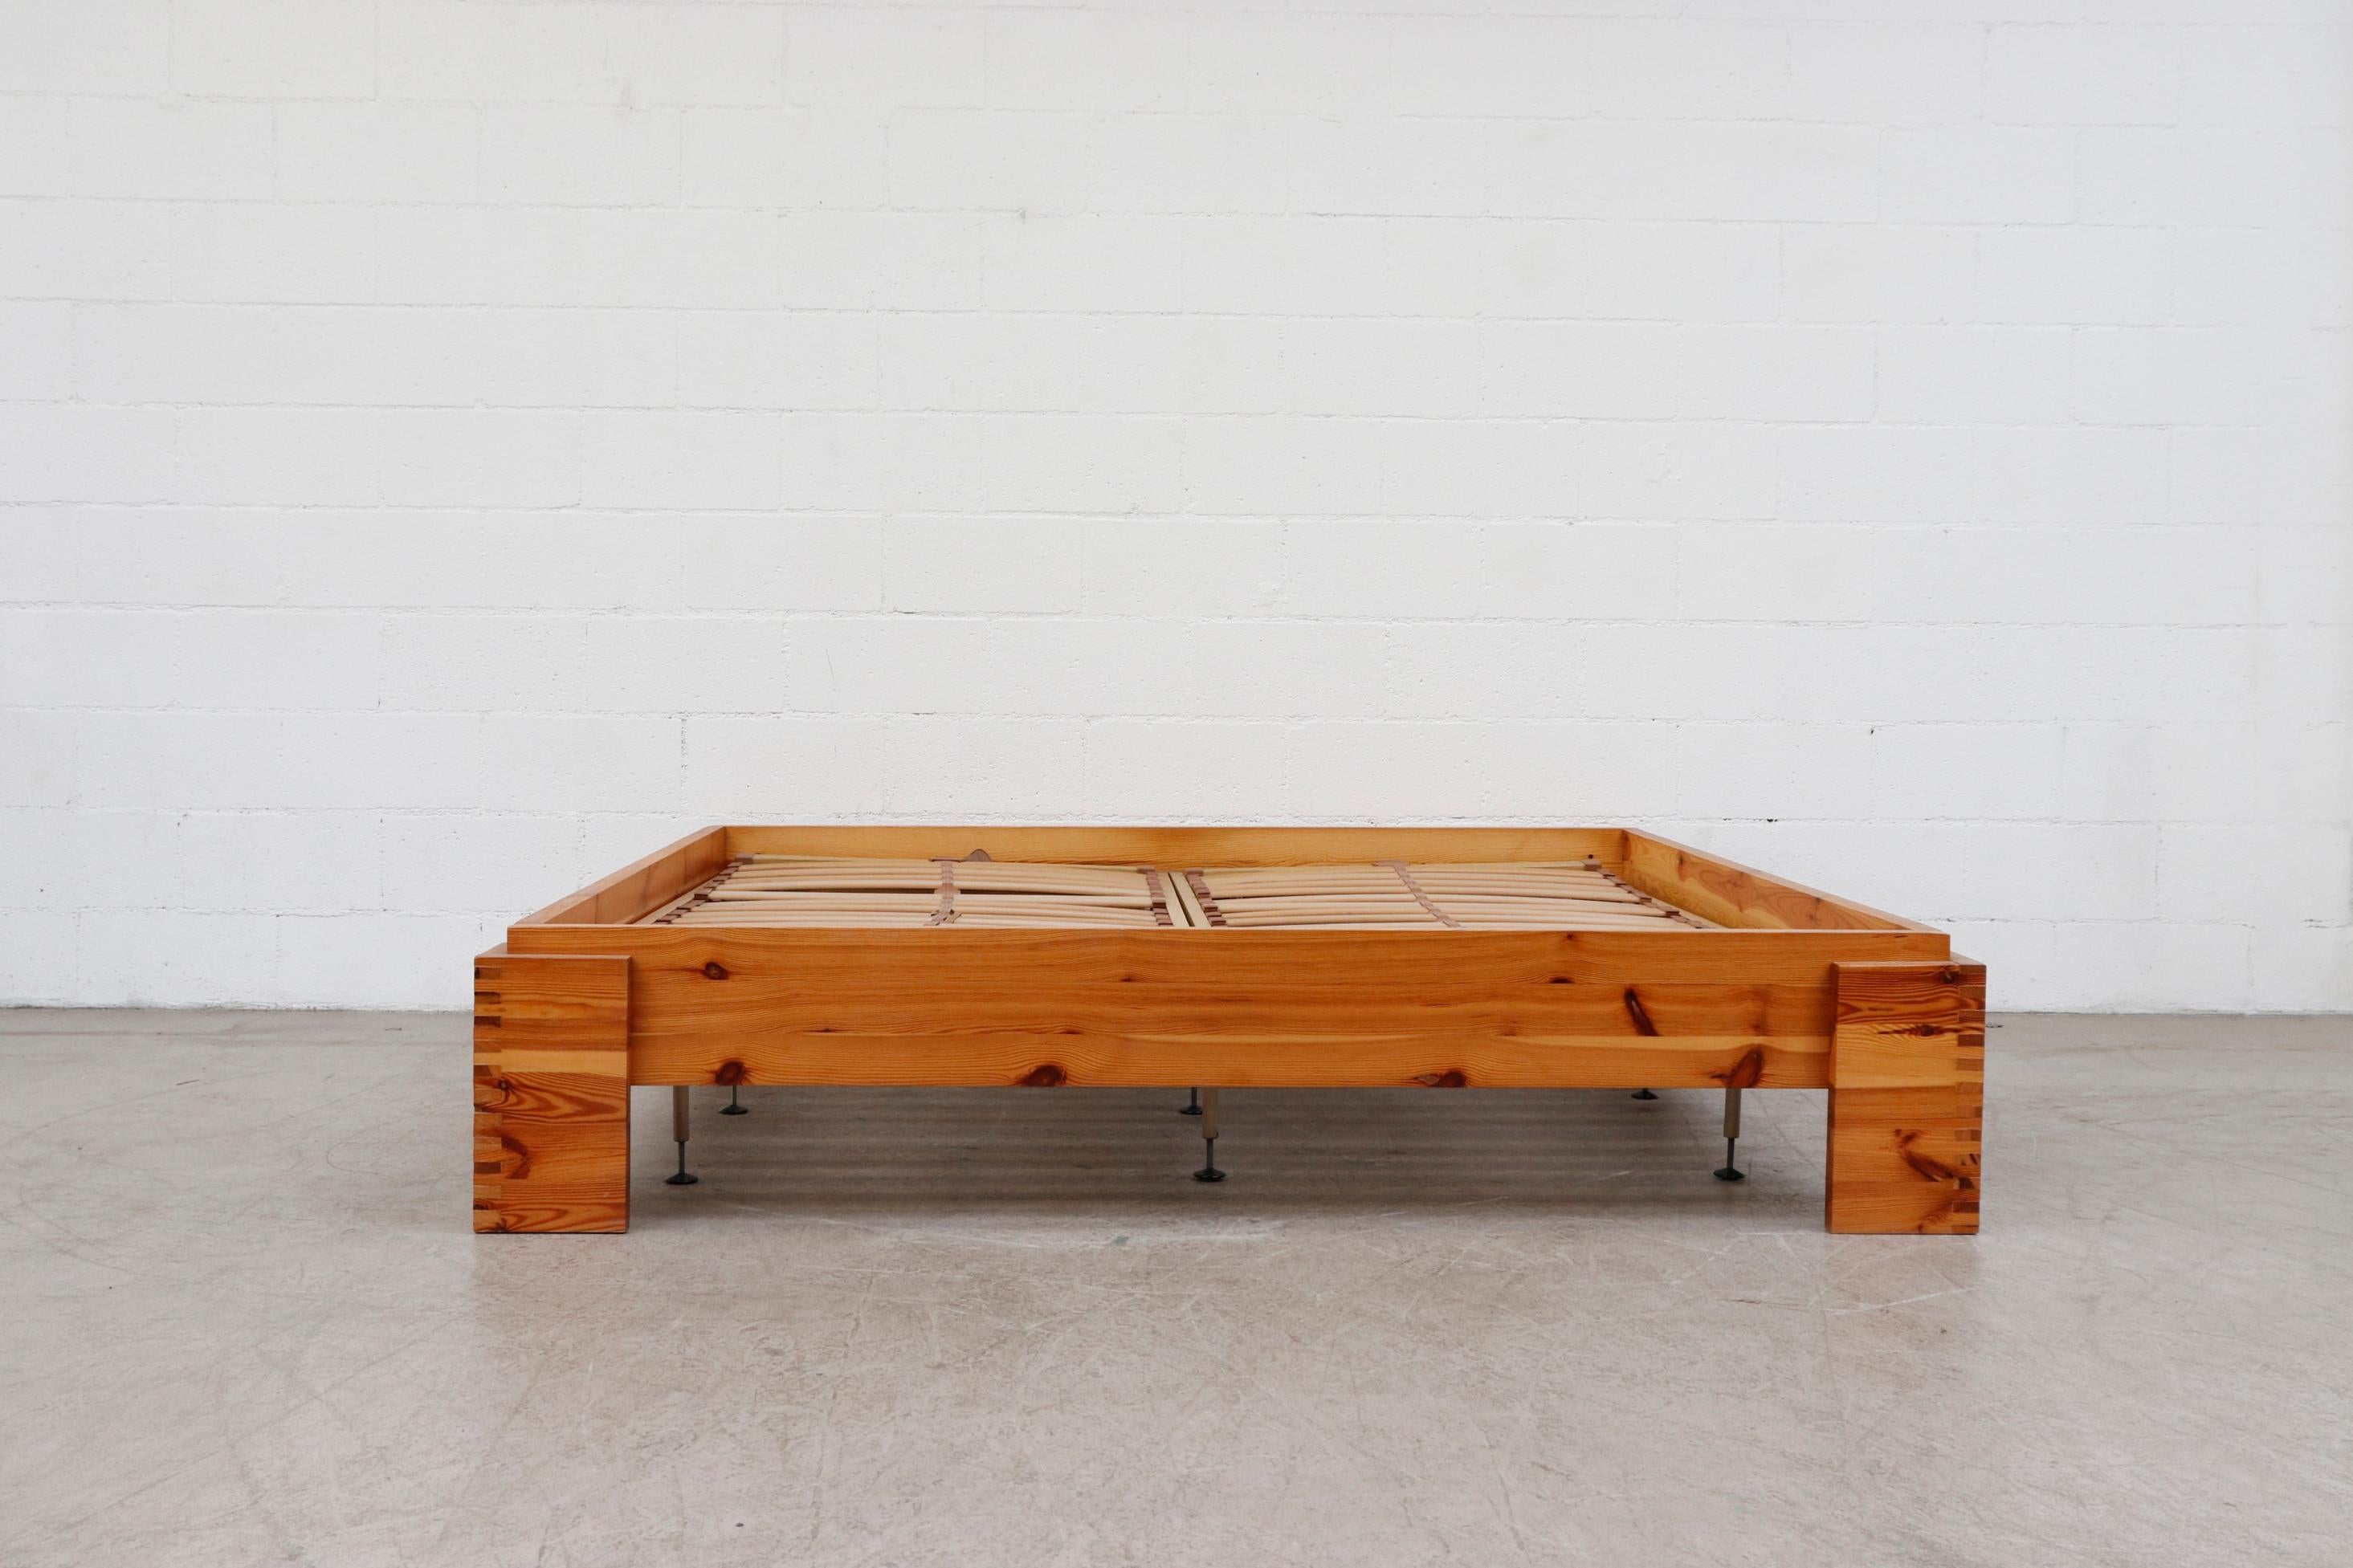 Midcentury Ate Van Apeldoorn pine European king bed frame. Shown with original adjustable plastic slat inserts. These are poor condition and just used for show as they came from the original owners. Metal supports are included if desired. Inside